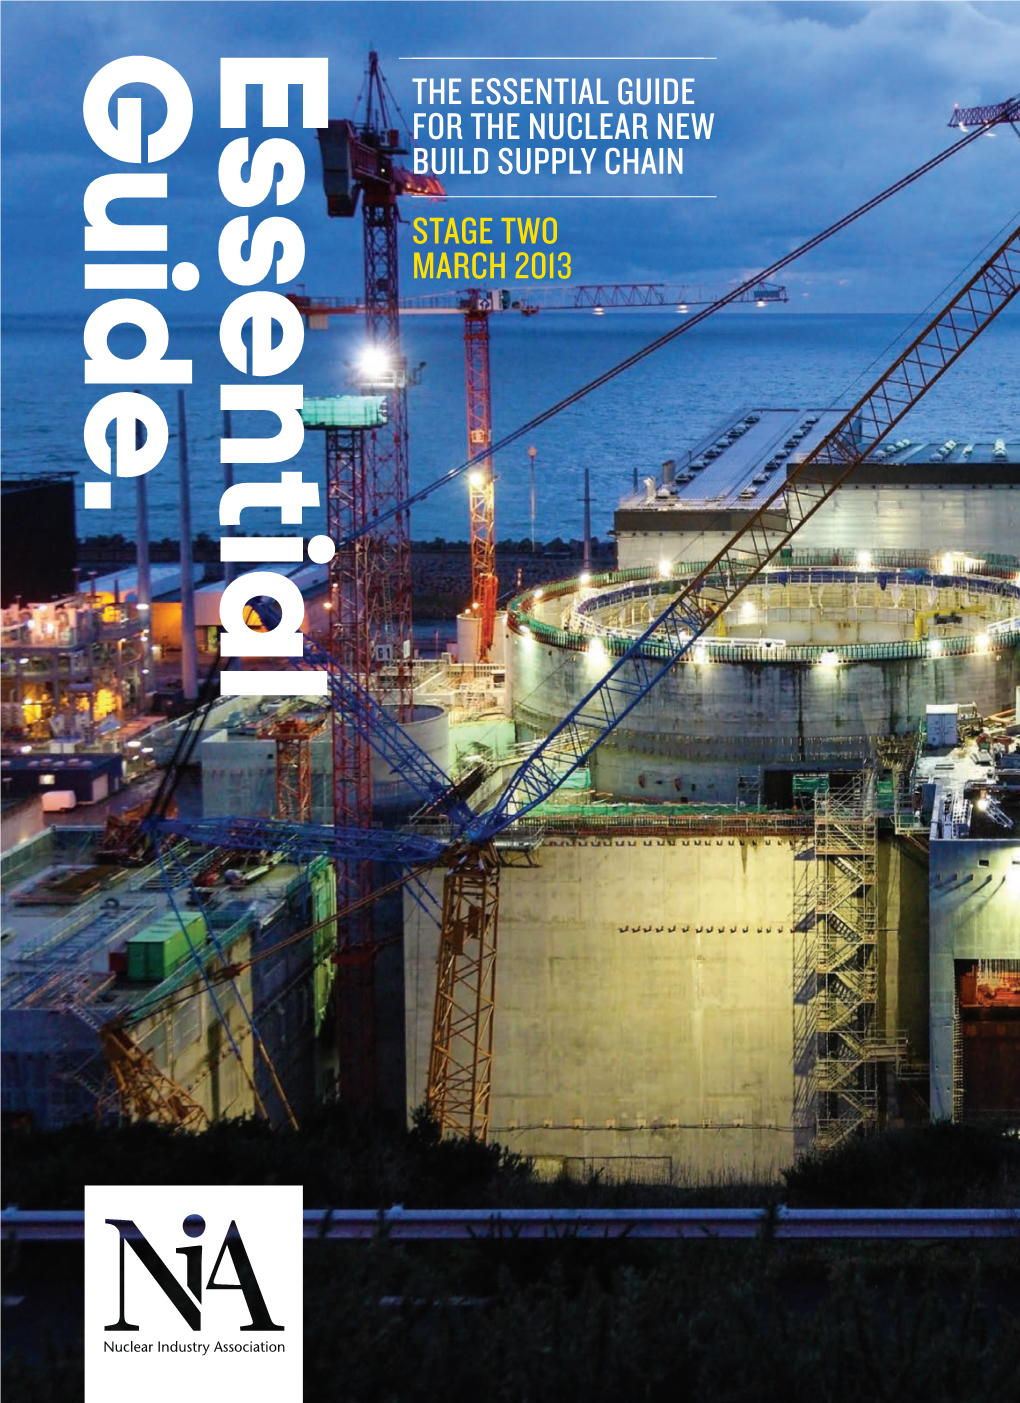 The Essential Guide for the Nuclear New Build Supply